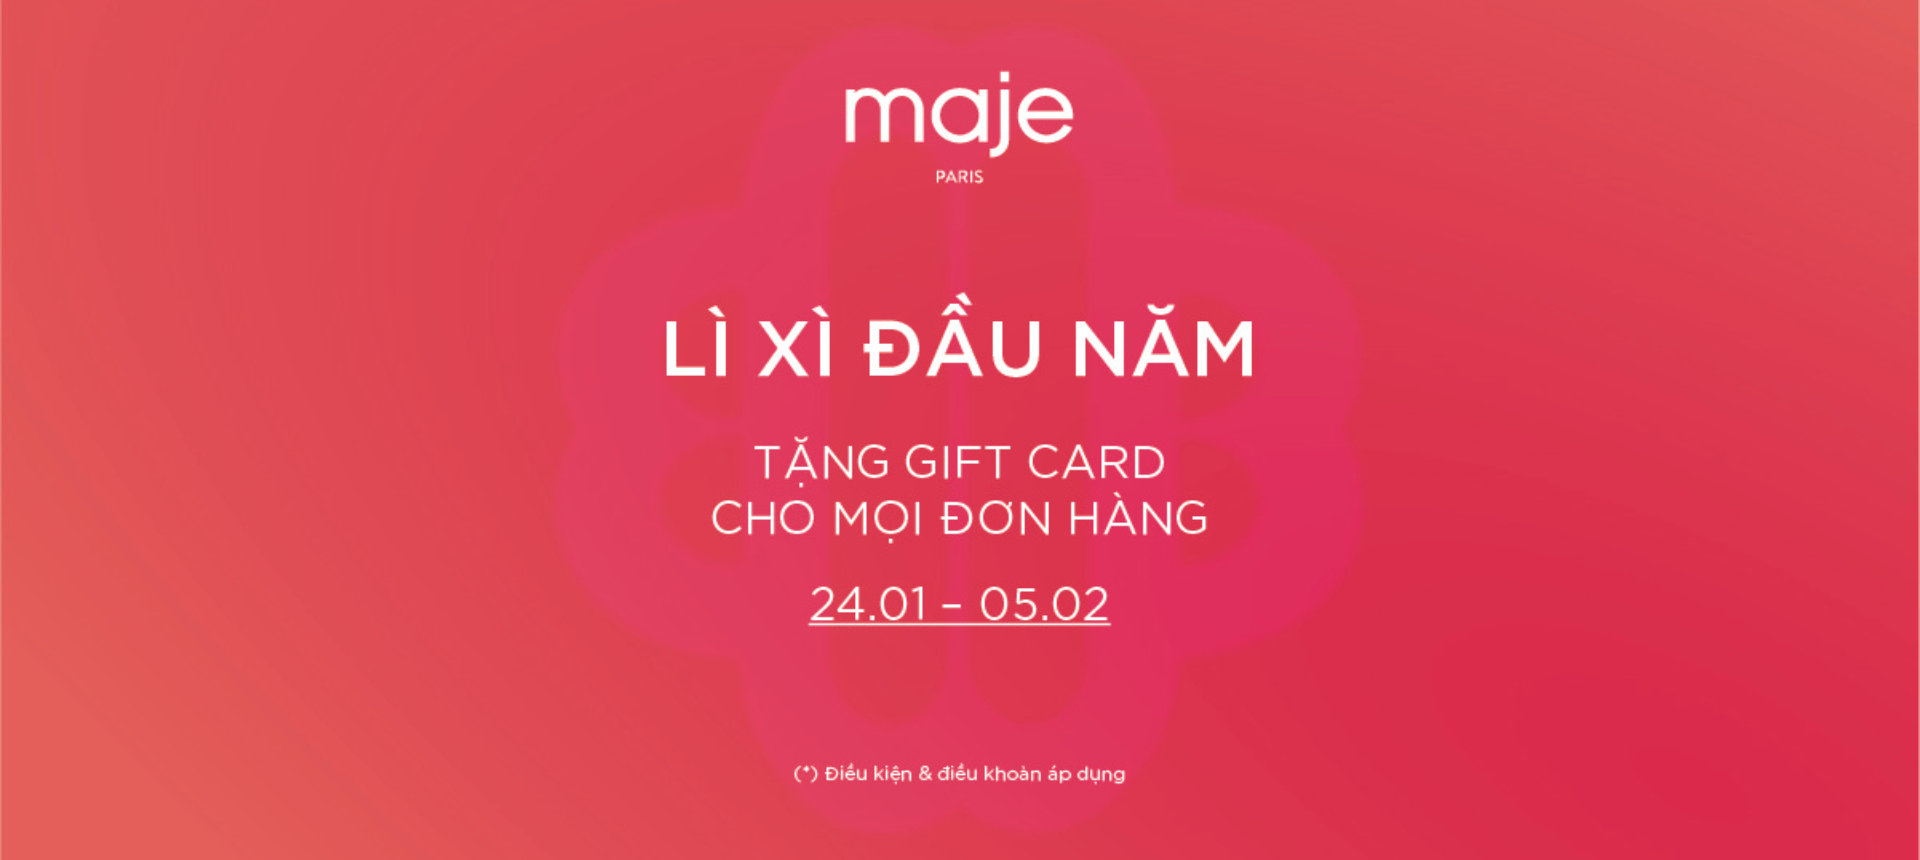 GIFT CARD FROM MAJE​